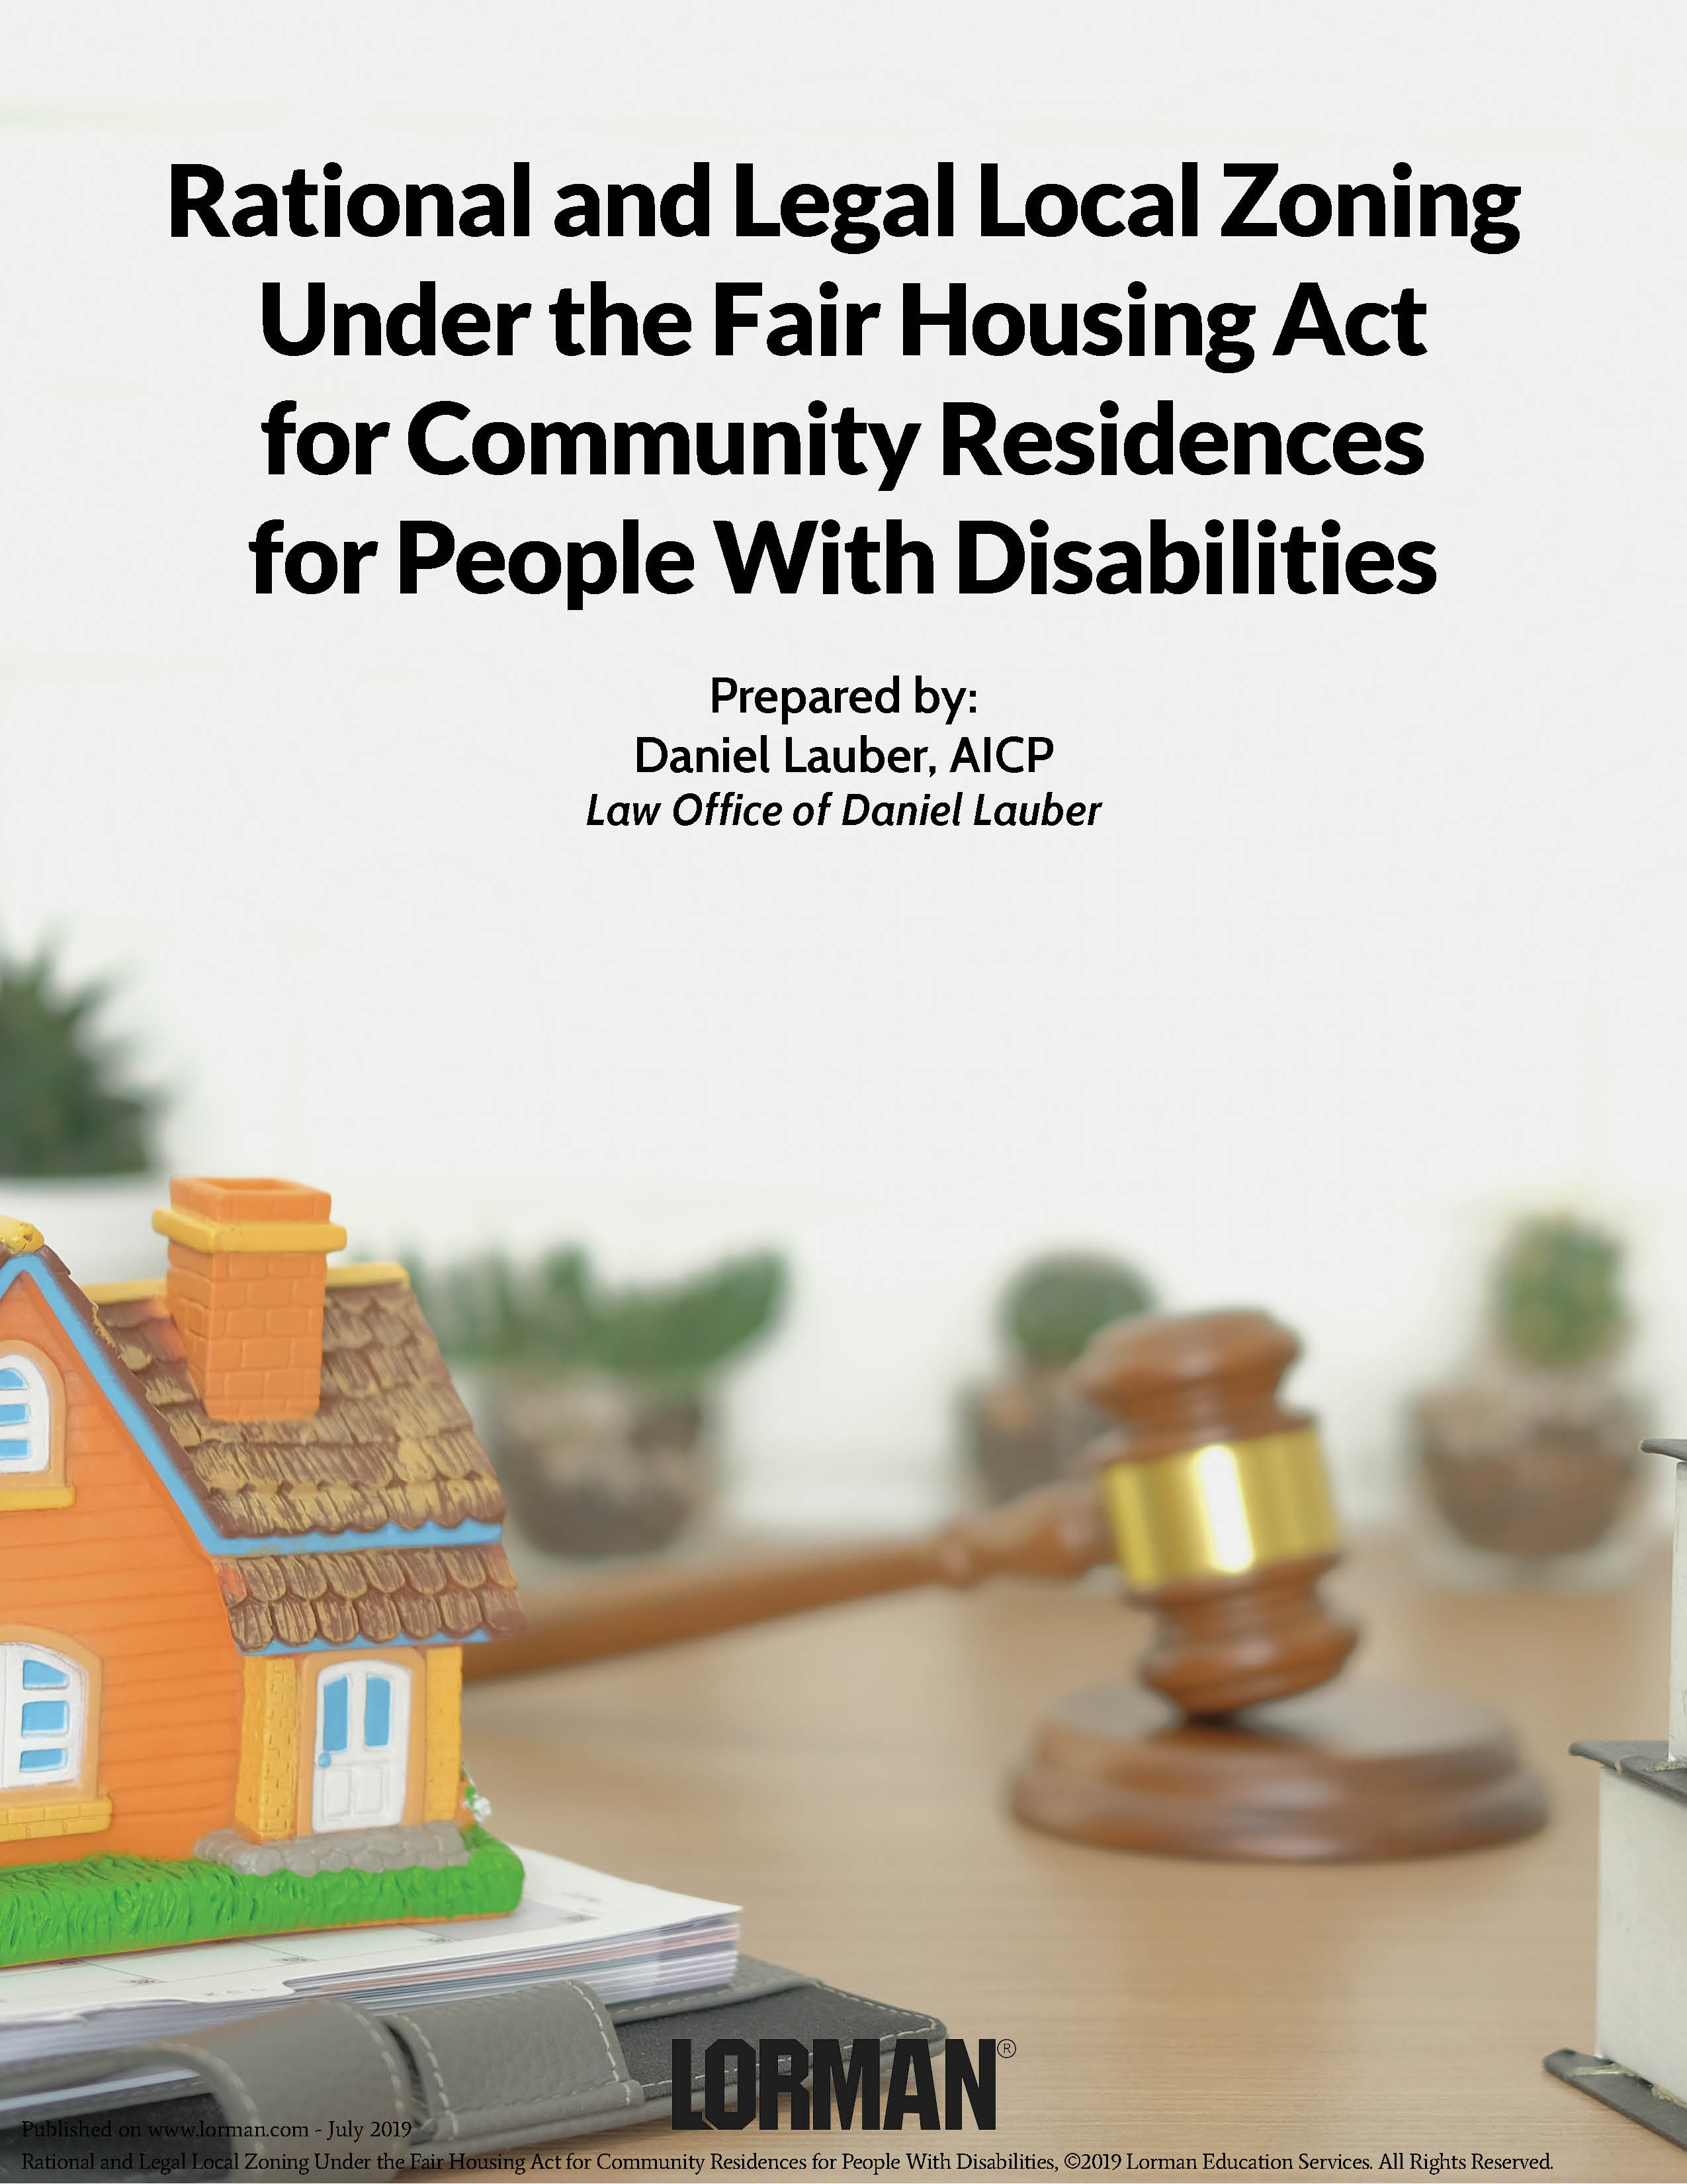 Rational & Legal Local Zoning Under the Fair Housing Act for Residences for People With Disabilities